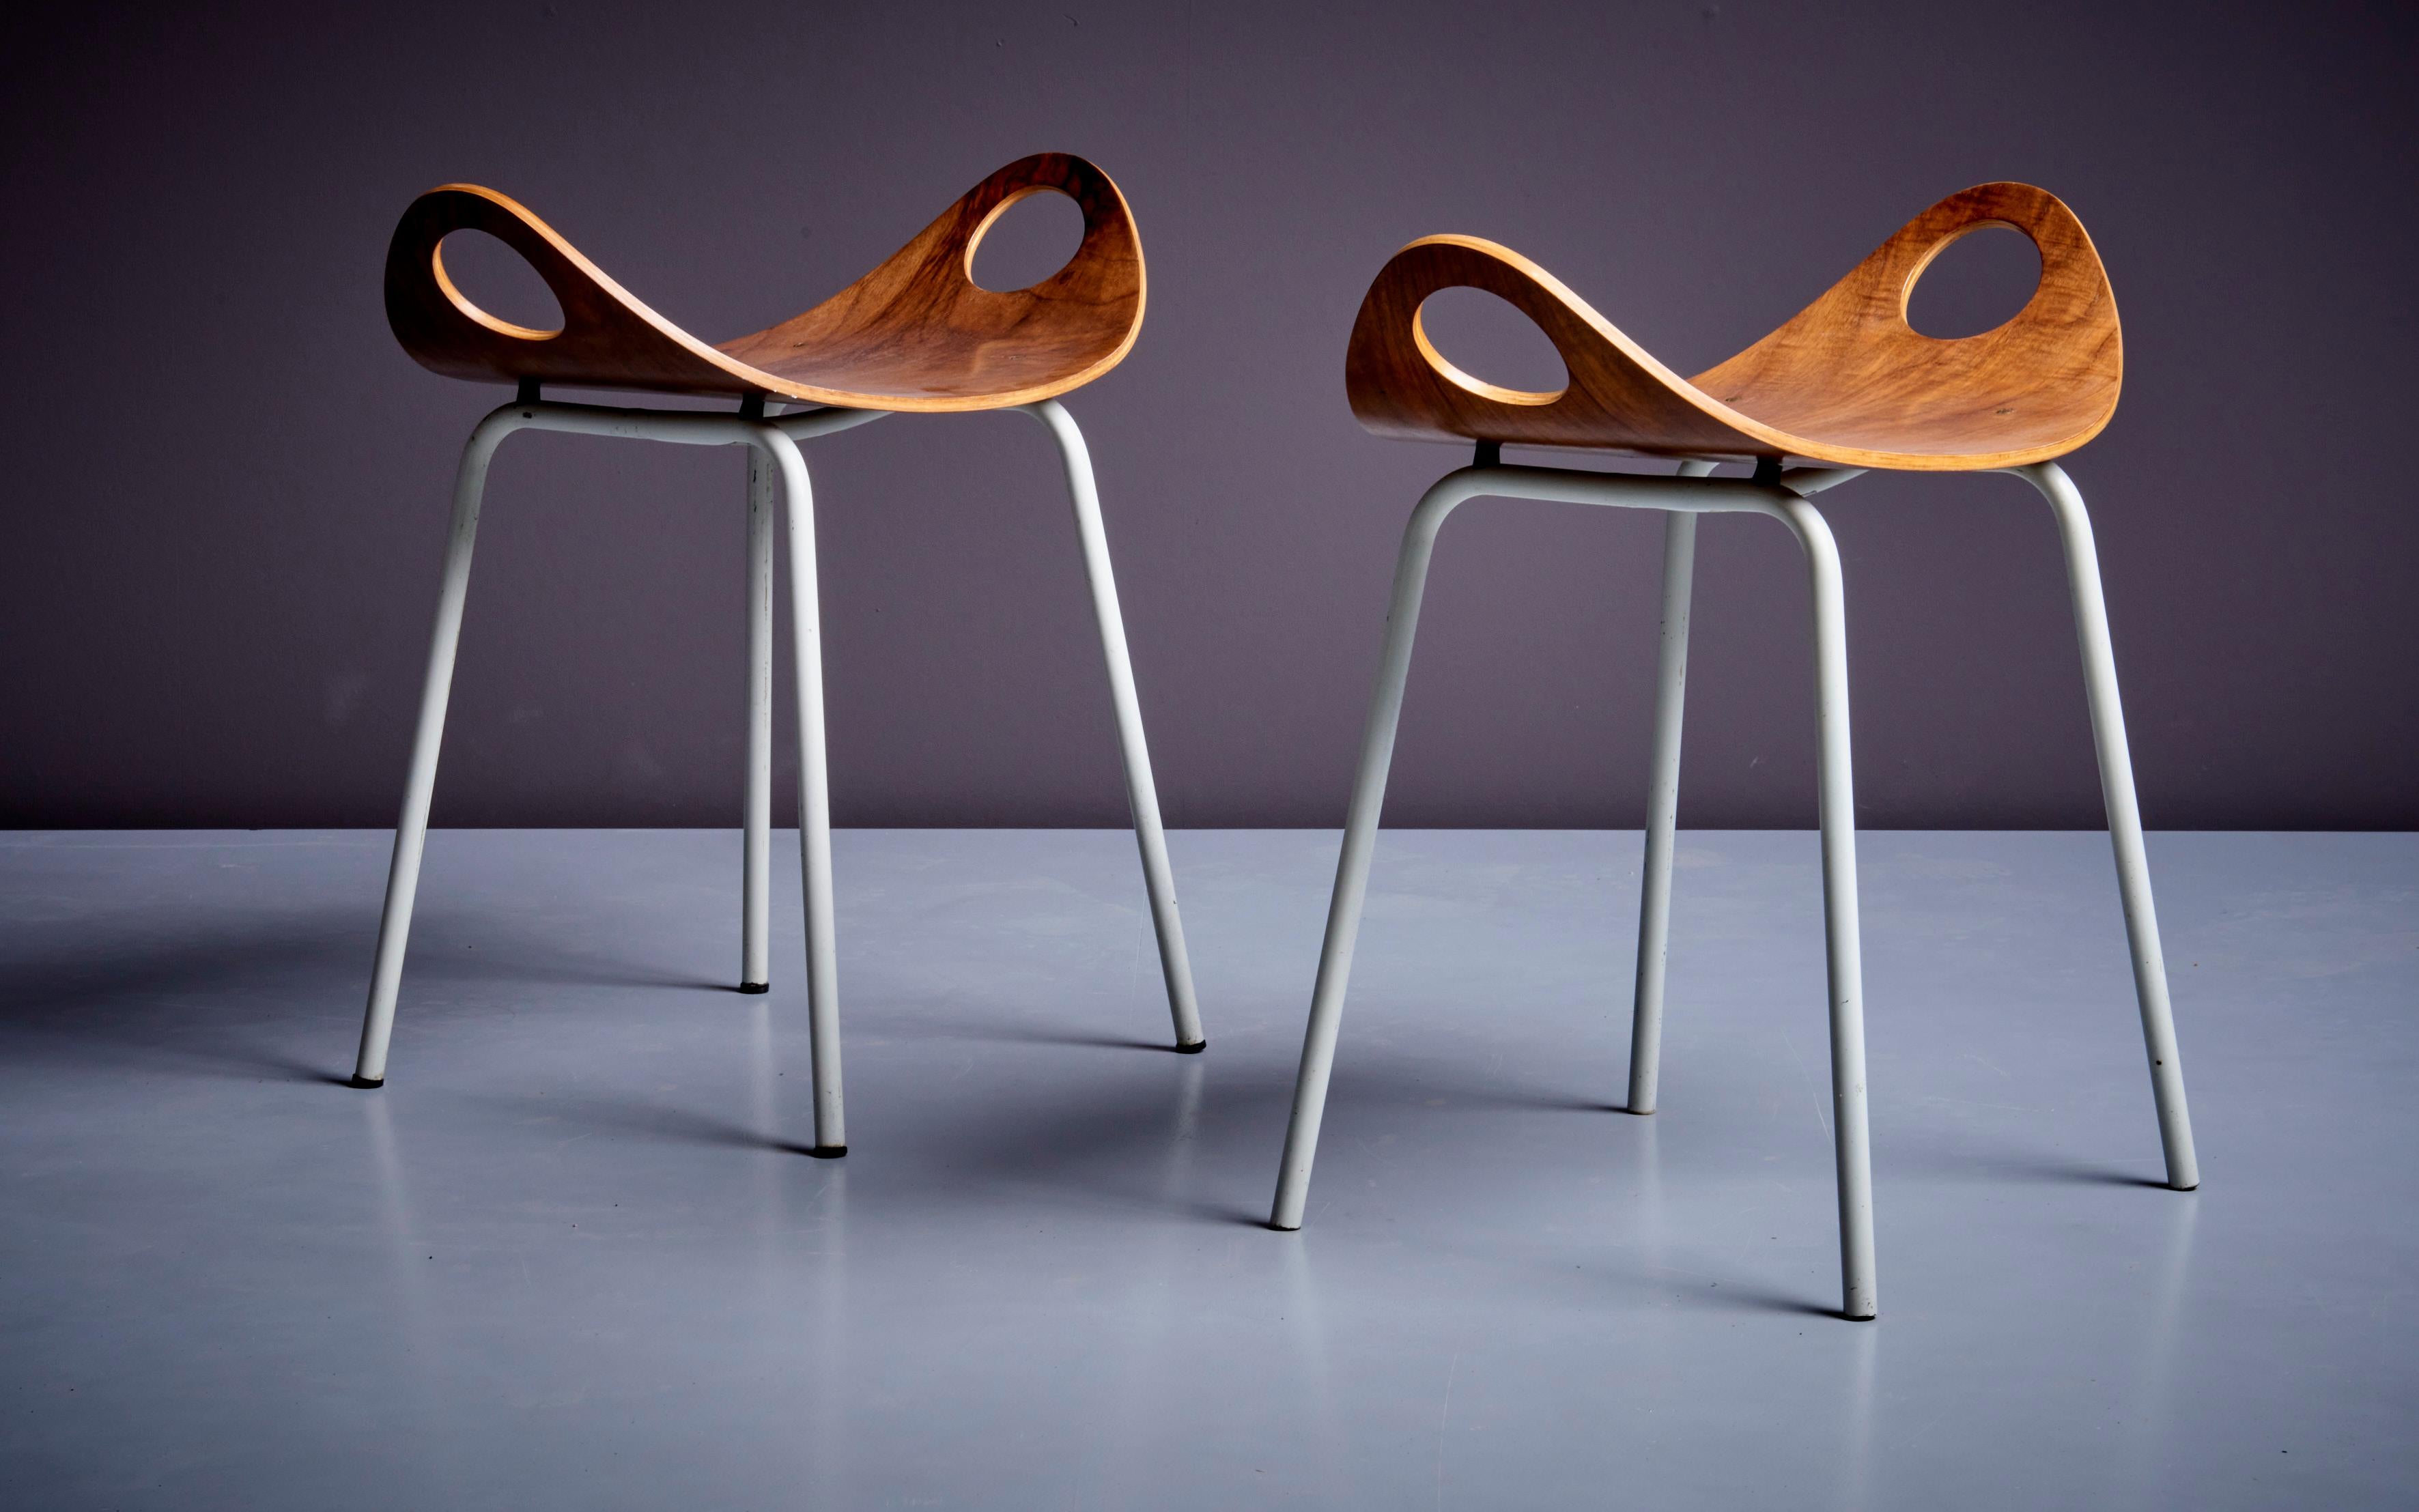 The stools are made of four white metal legs and a walnut plywood seat which curves upwards. A simple and elegant design, labelled by J. Merivaara. Authentic patina.